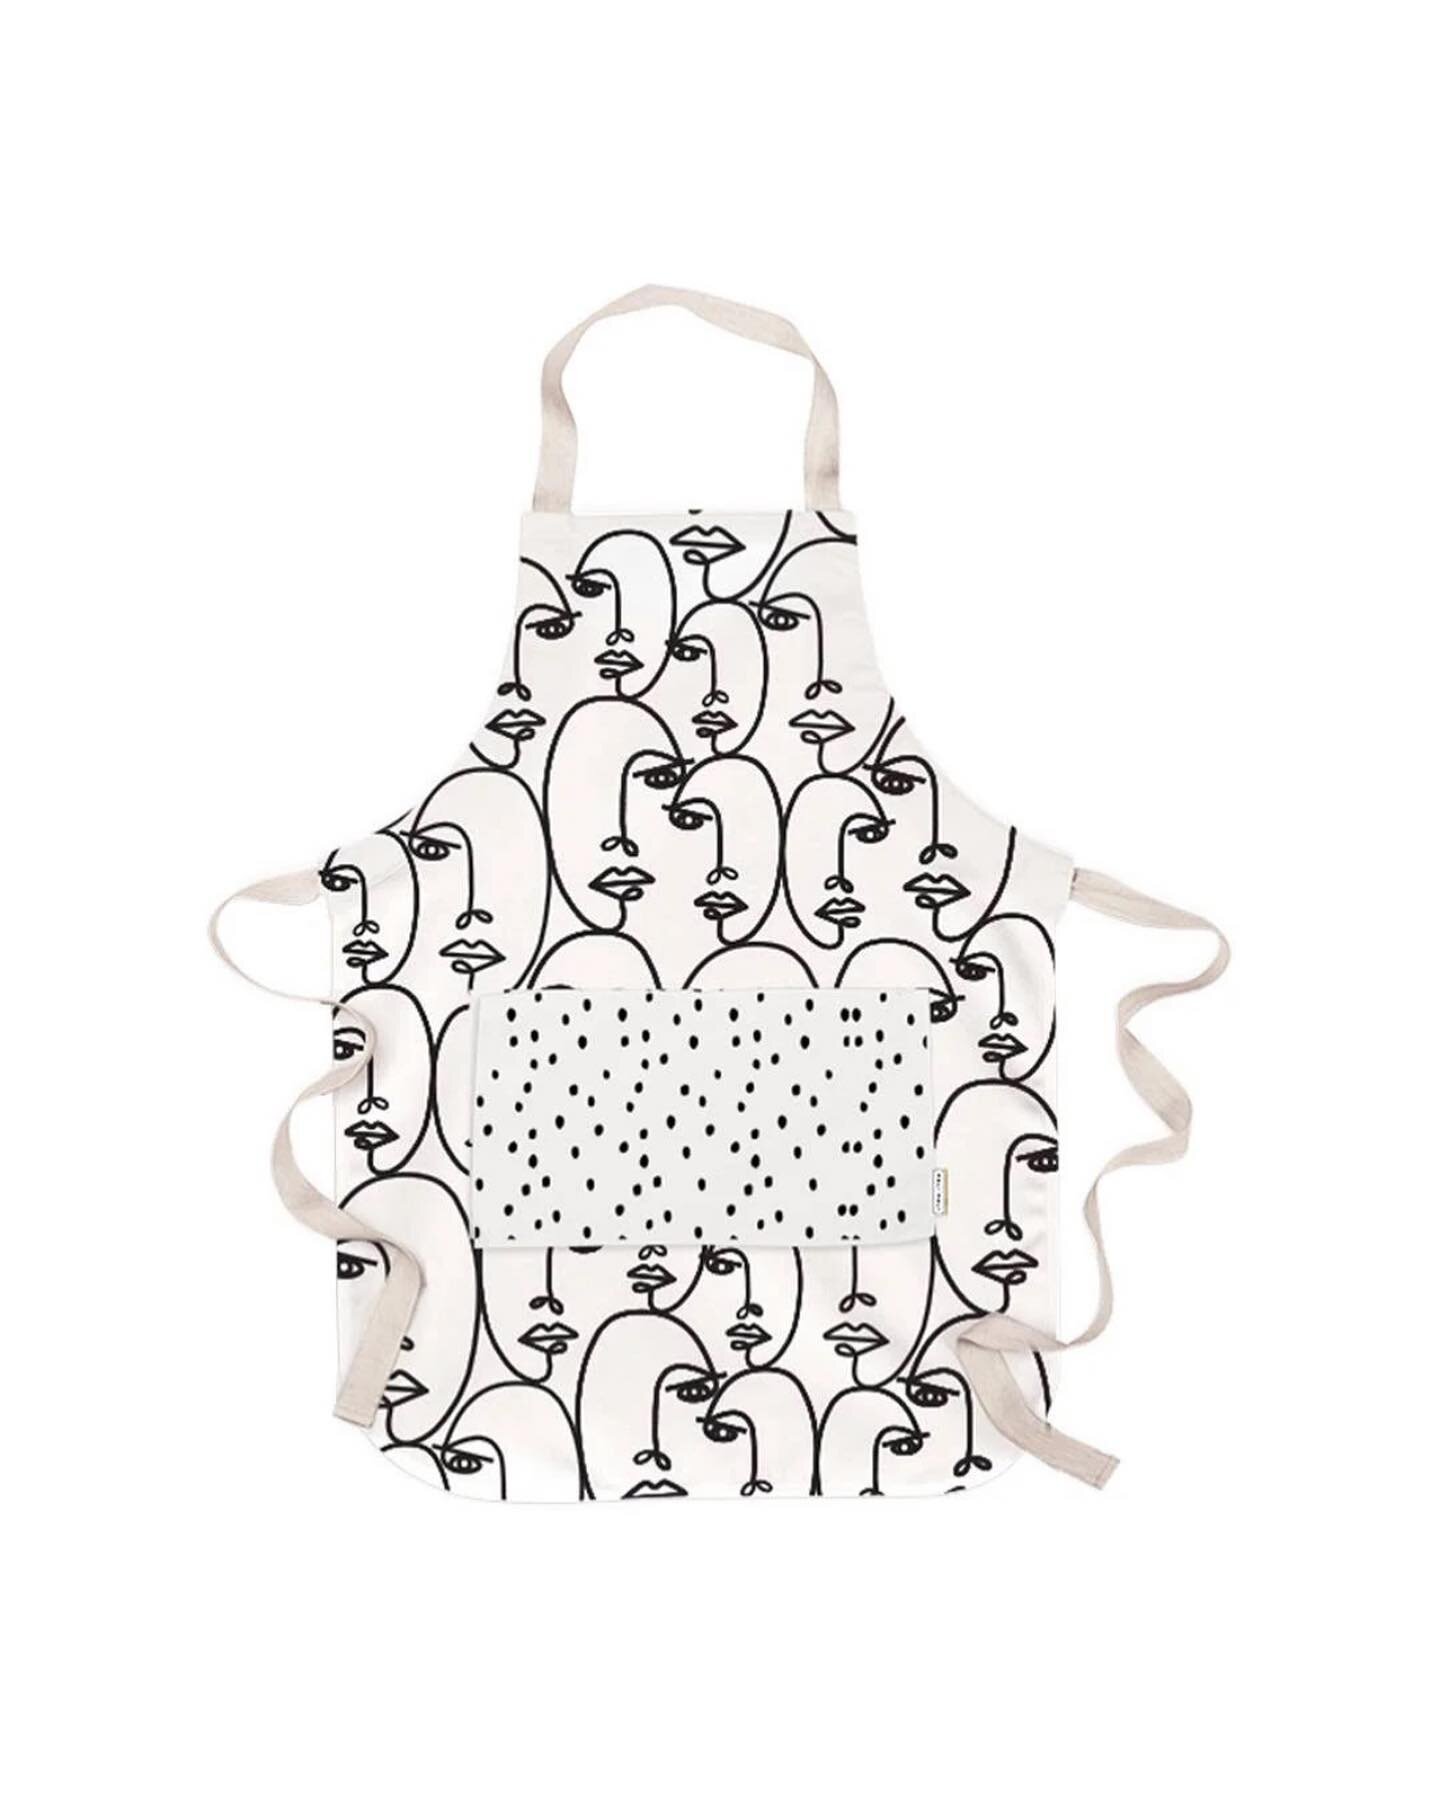 Face to Face Apron by Hali Hali

Protect clothes from spills and splatters with this cotton apron adorned with playfully chic faces. Spacious polka dot front pocket can hold all kinds of kitchen tools and gadgets (and, most importantly, your phone) w